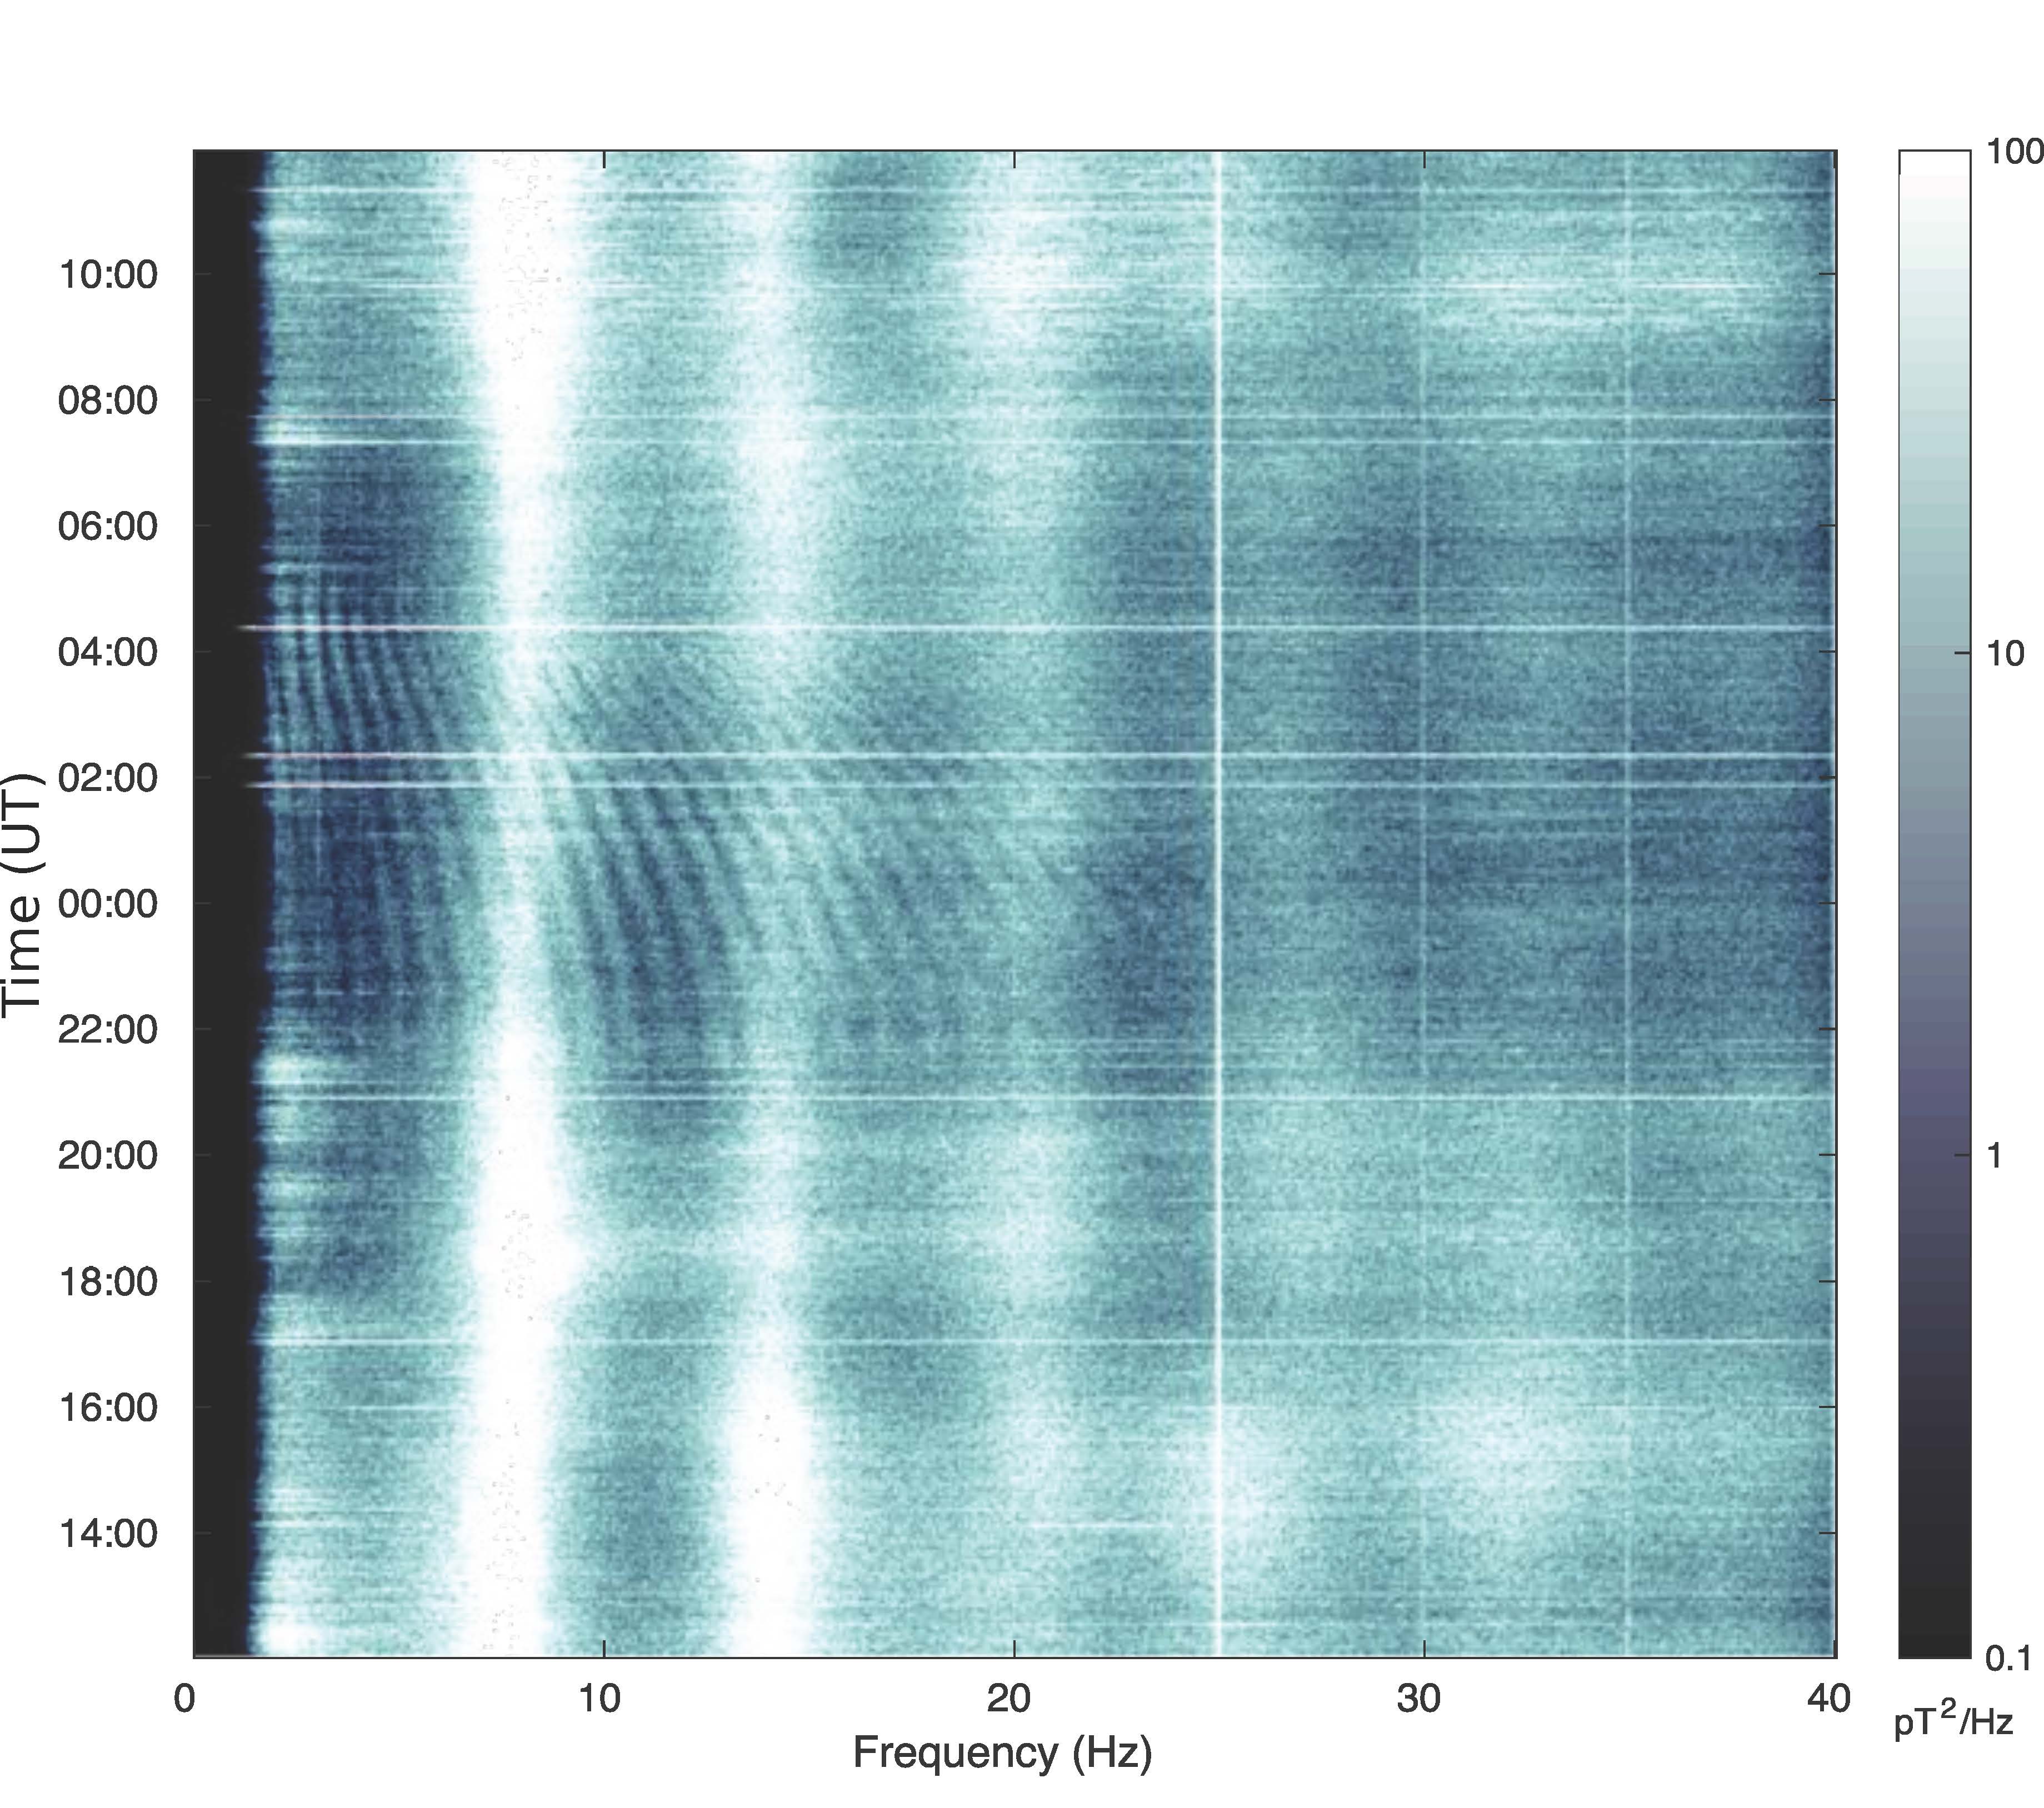 Figure 3: Spectrogram for 2â€“3 December 2013 from the north to south coil (CH1) showing ionospheric AlfvÃ©n resonances intersecting and interfering with the first three Schumann resonances.